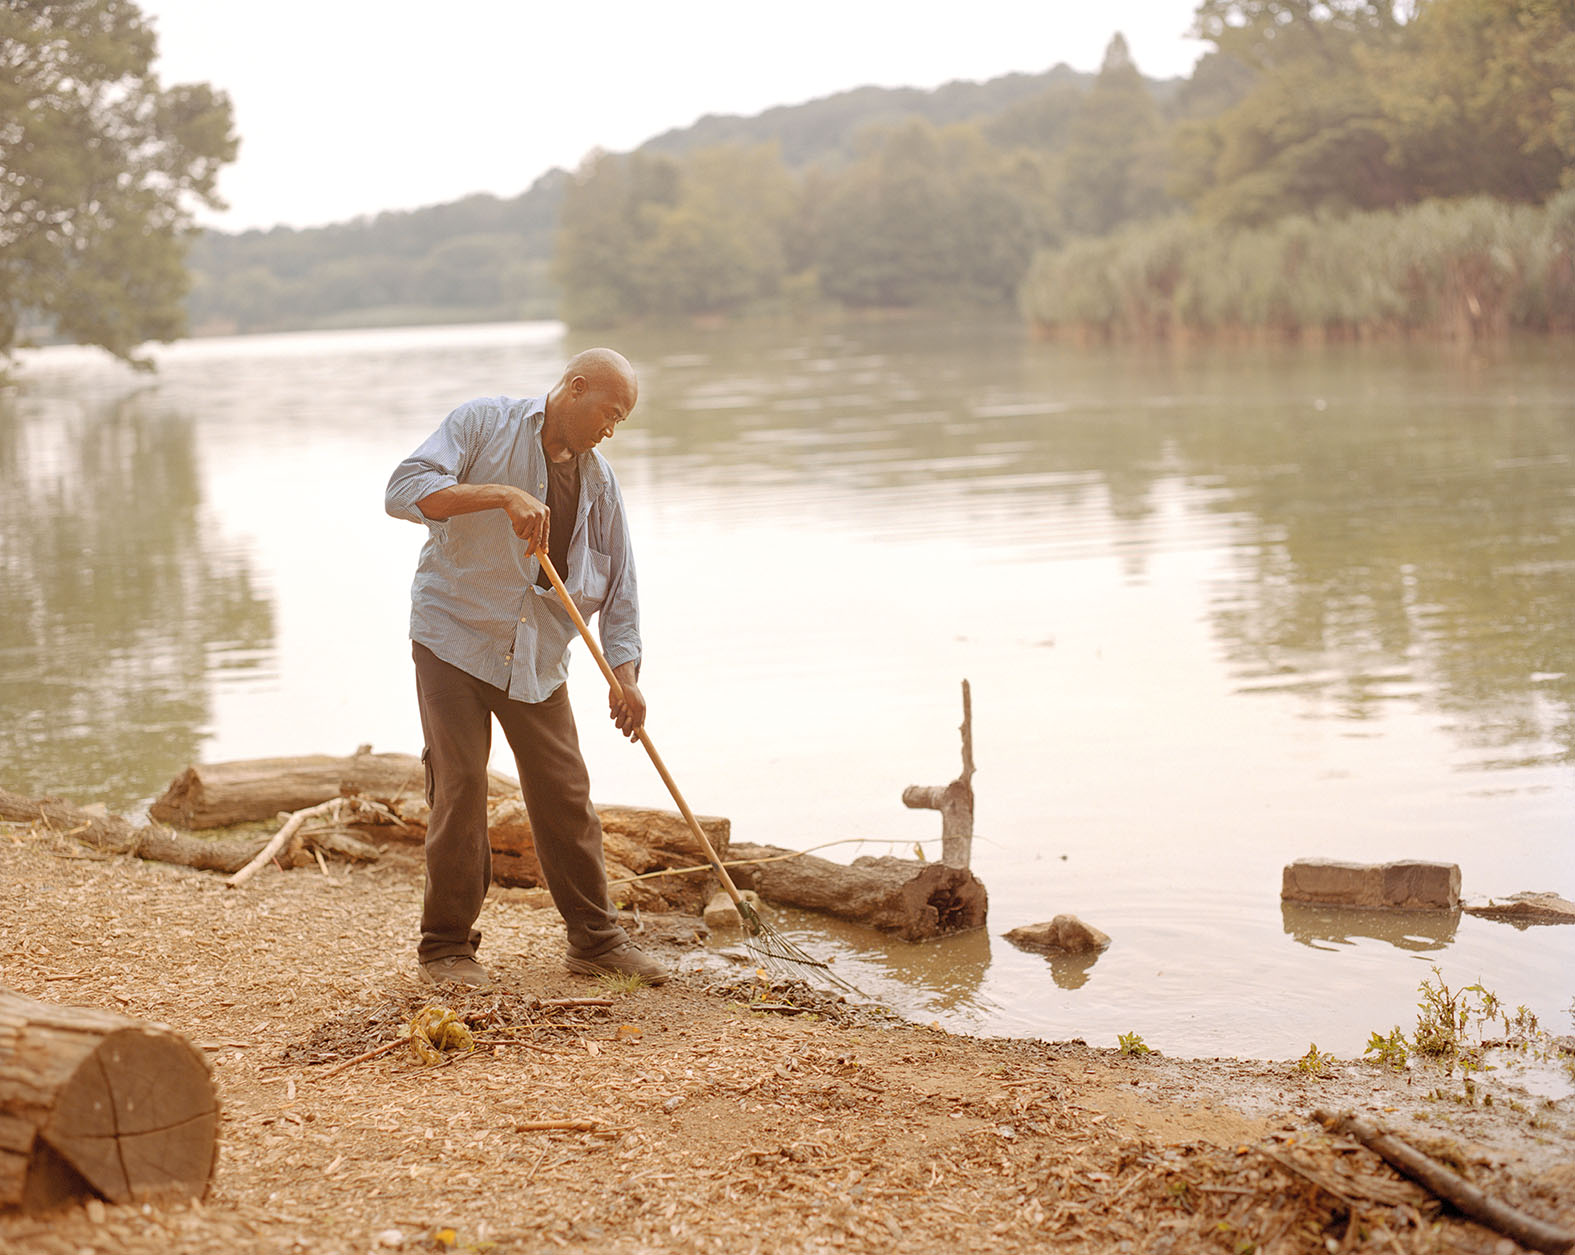 Color photograph of a man raking the edge of a body of water